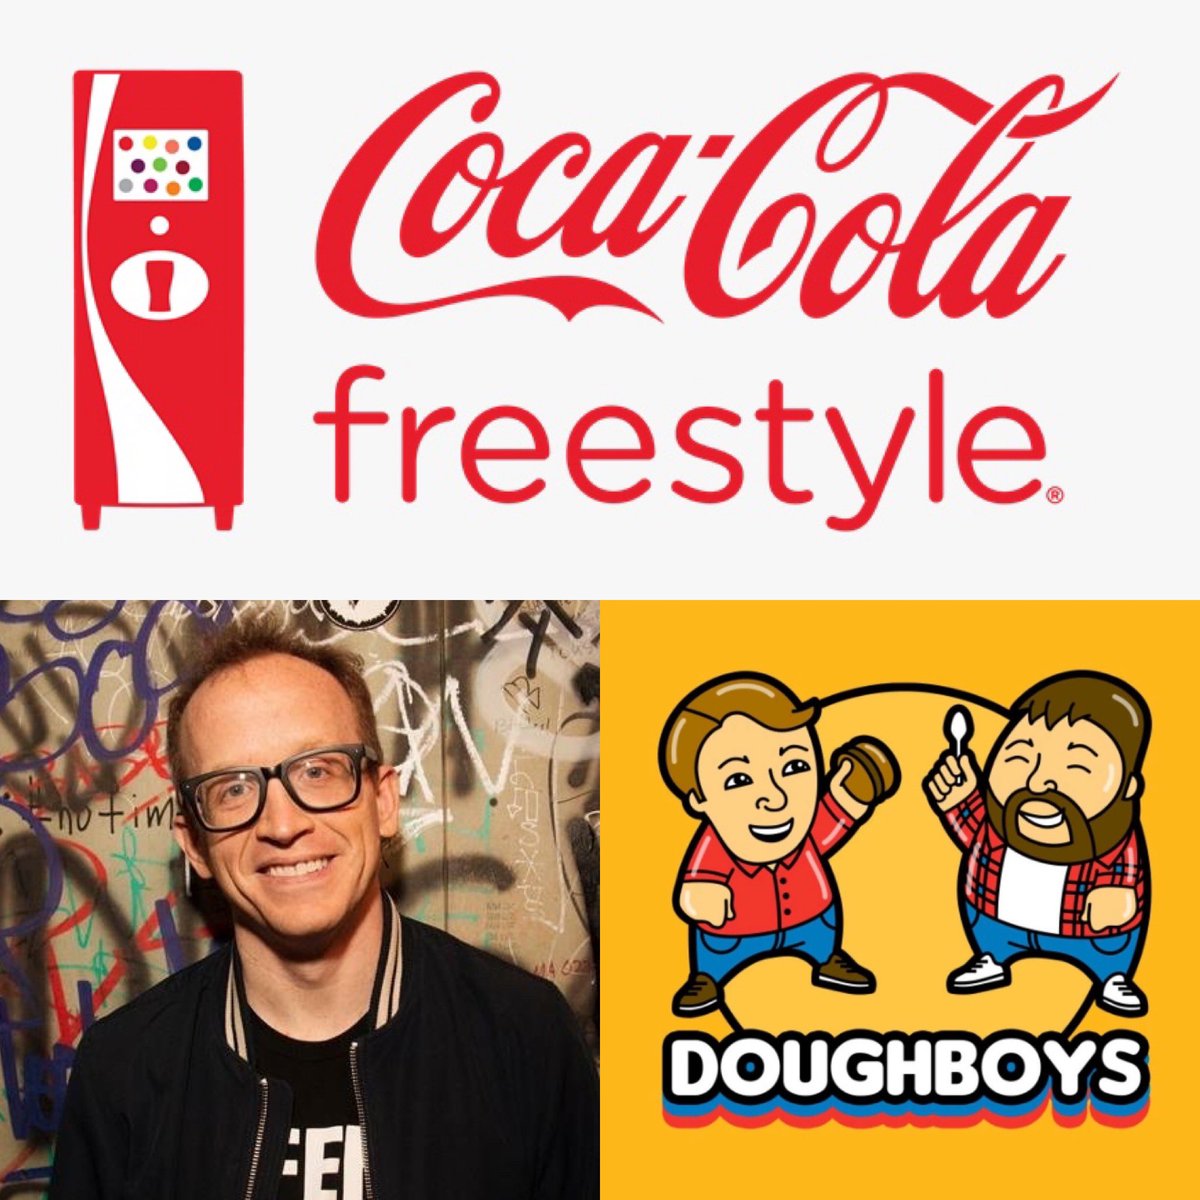 New Doughboys Thursday! Chris Gethard (Beautiful Anonymous, The Chris Gethard Show) joins the 'boys to talk New Jersey eats and all things soda before a breakdown of the Coca-Cola Freestyle machine. Plus, a special edition of Slop Quiz. headgum.com/doughboys/coca…